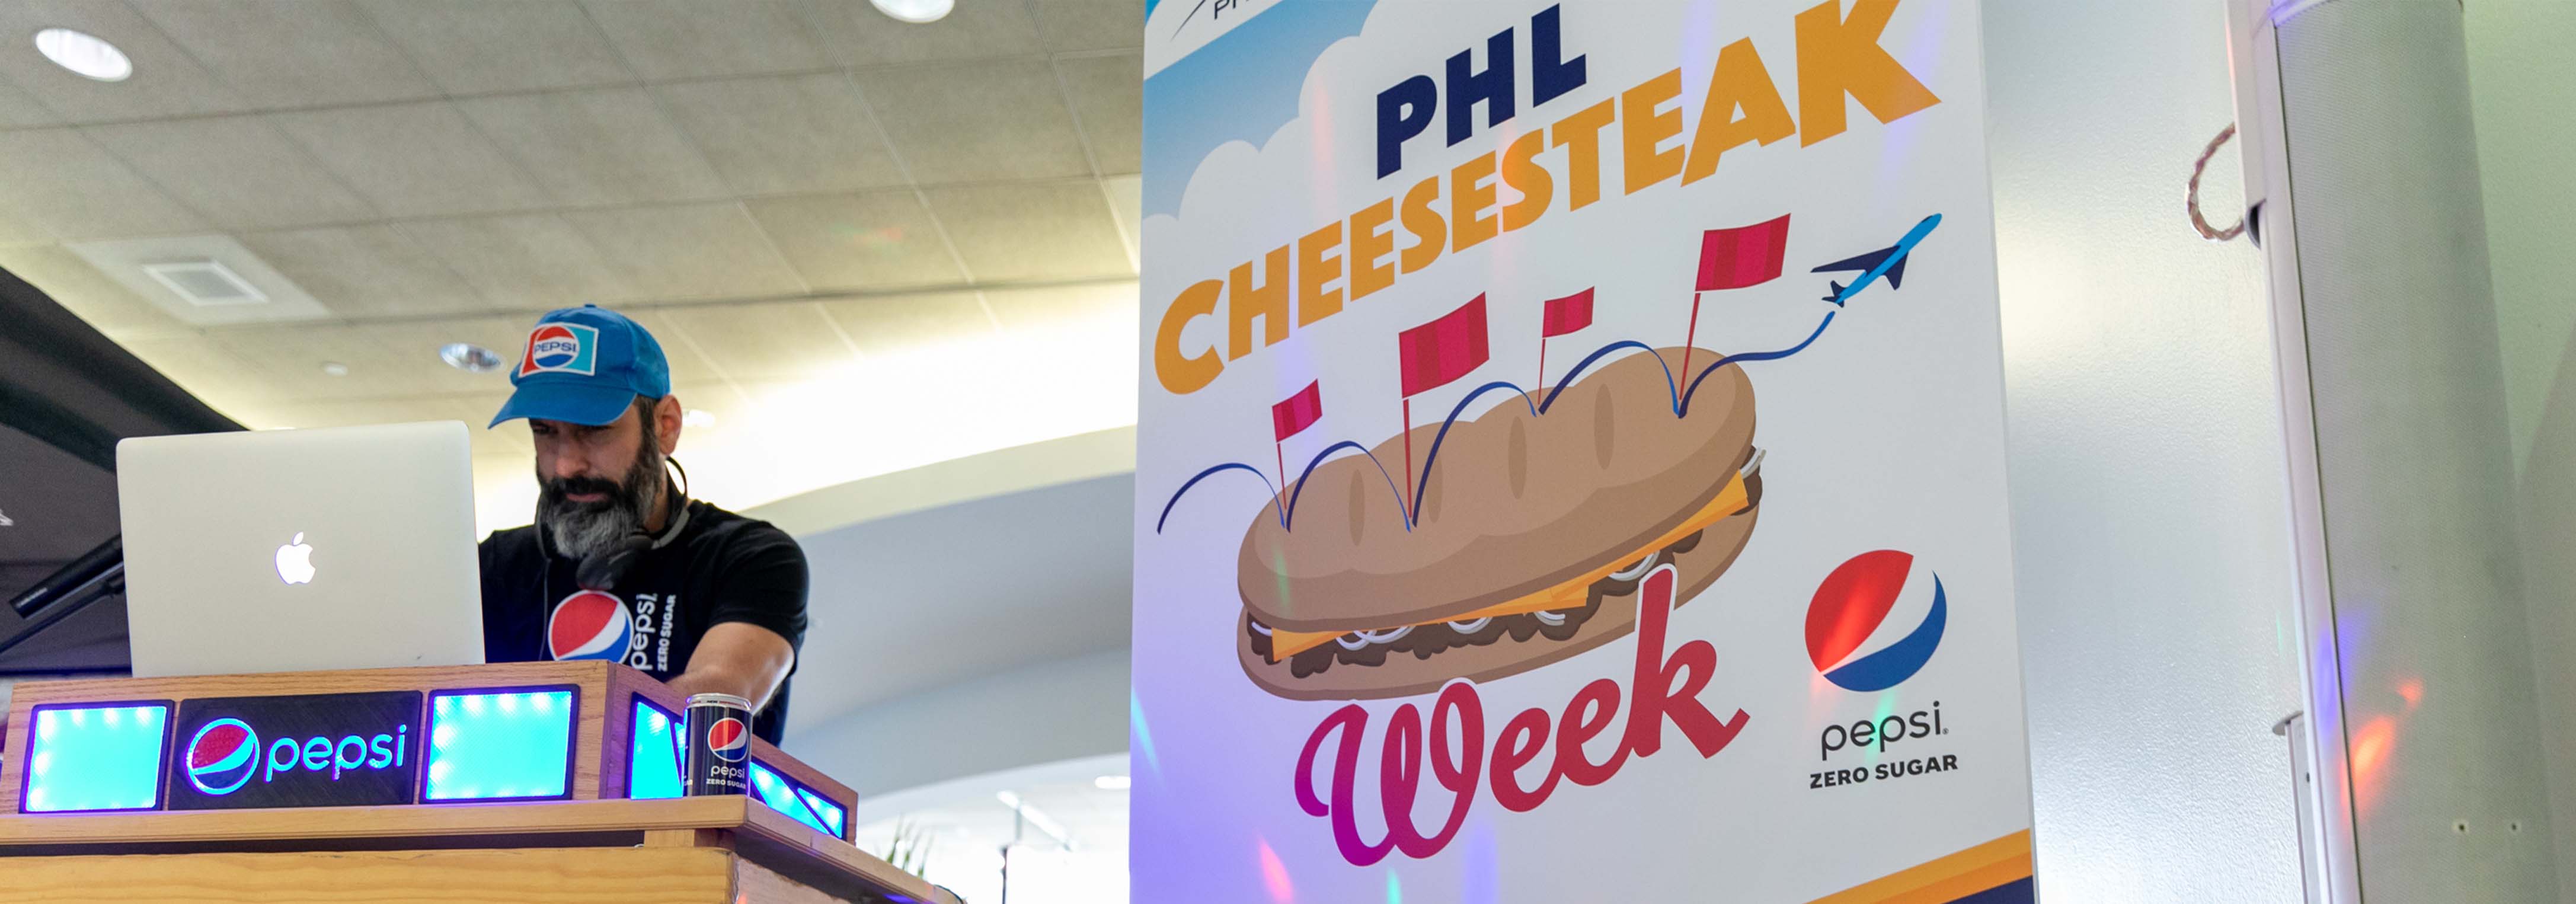 PHL Cheesesteak week sign with DJ with Pepsi gear on